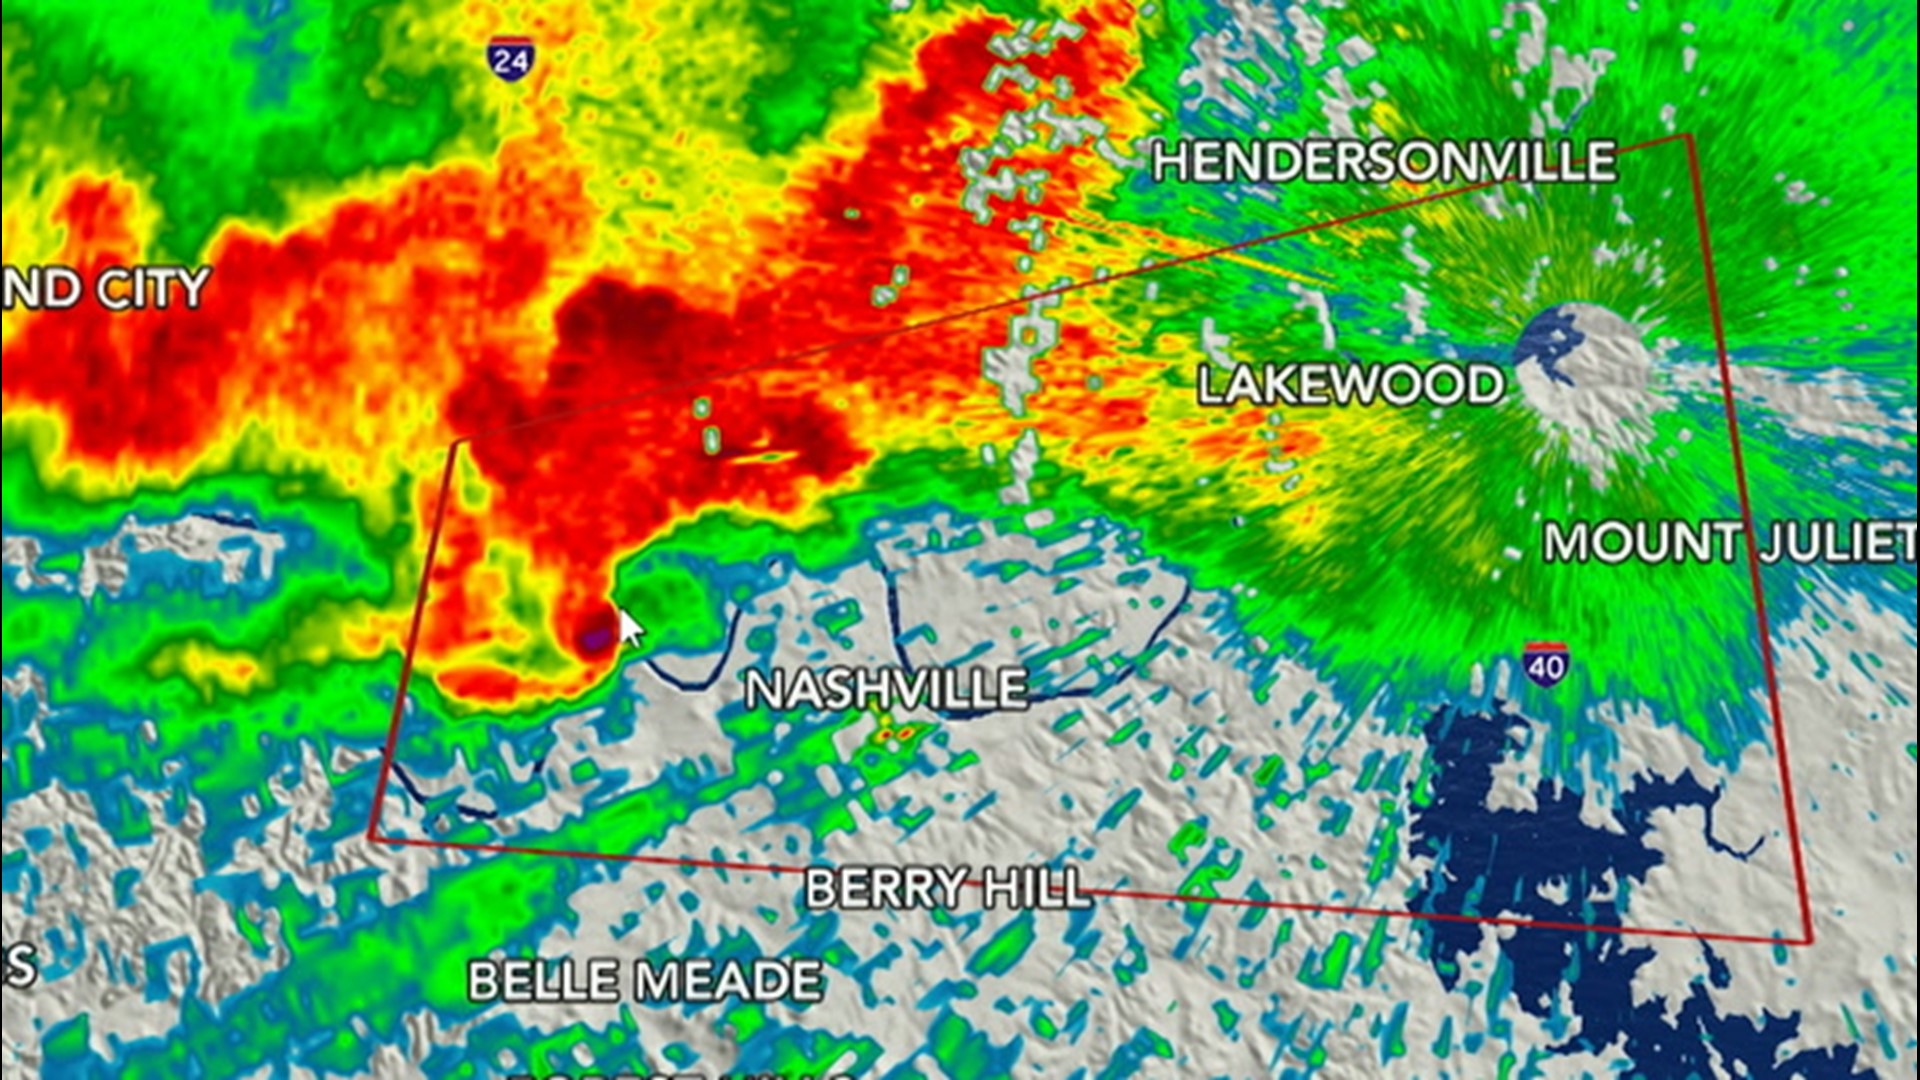 AccuWeather Meteorologist Laura Velasquez describes what was happening on the radar when the tornado struck Nashville, Tennessee, on March 3.